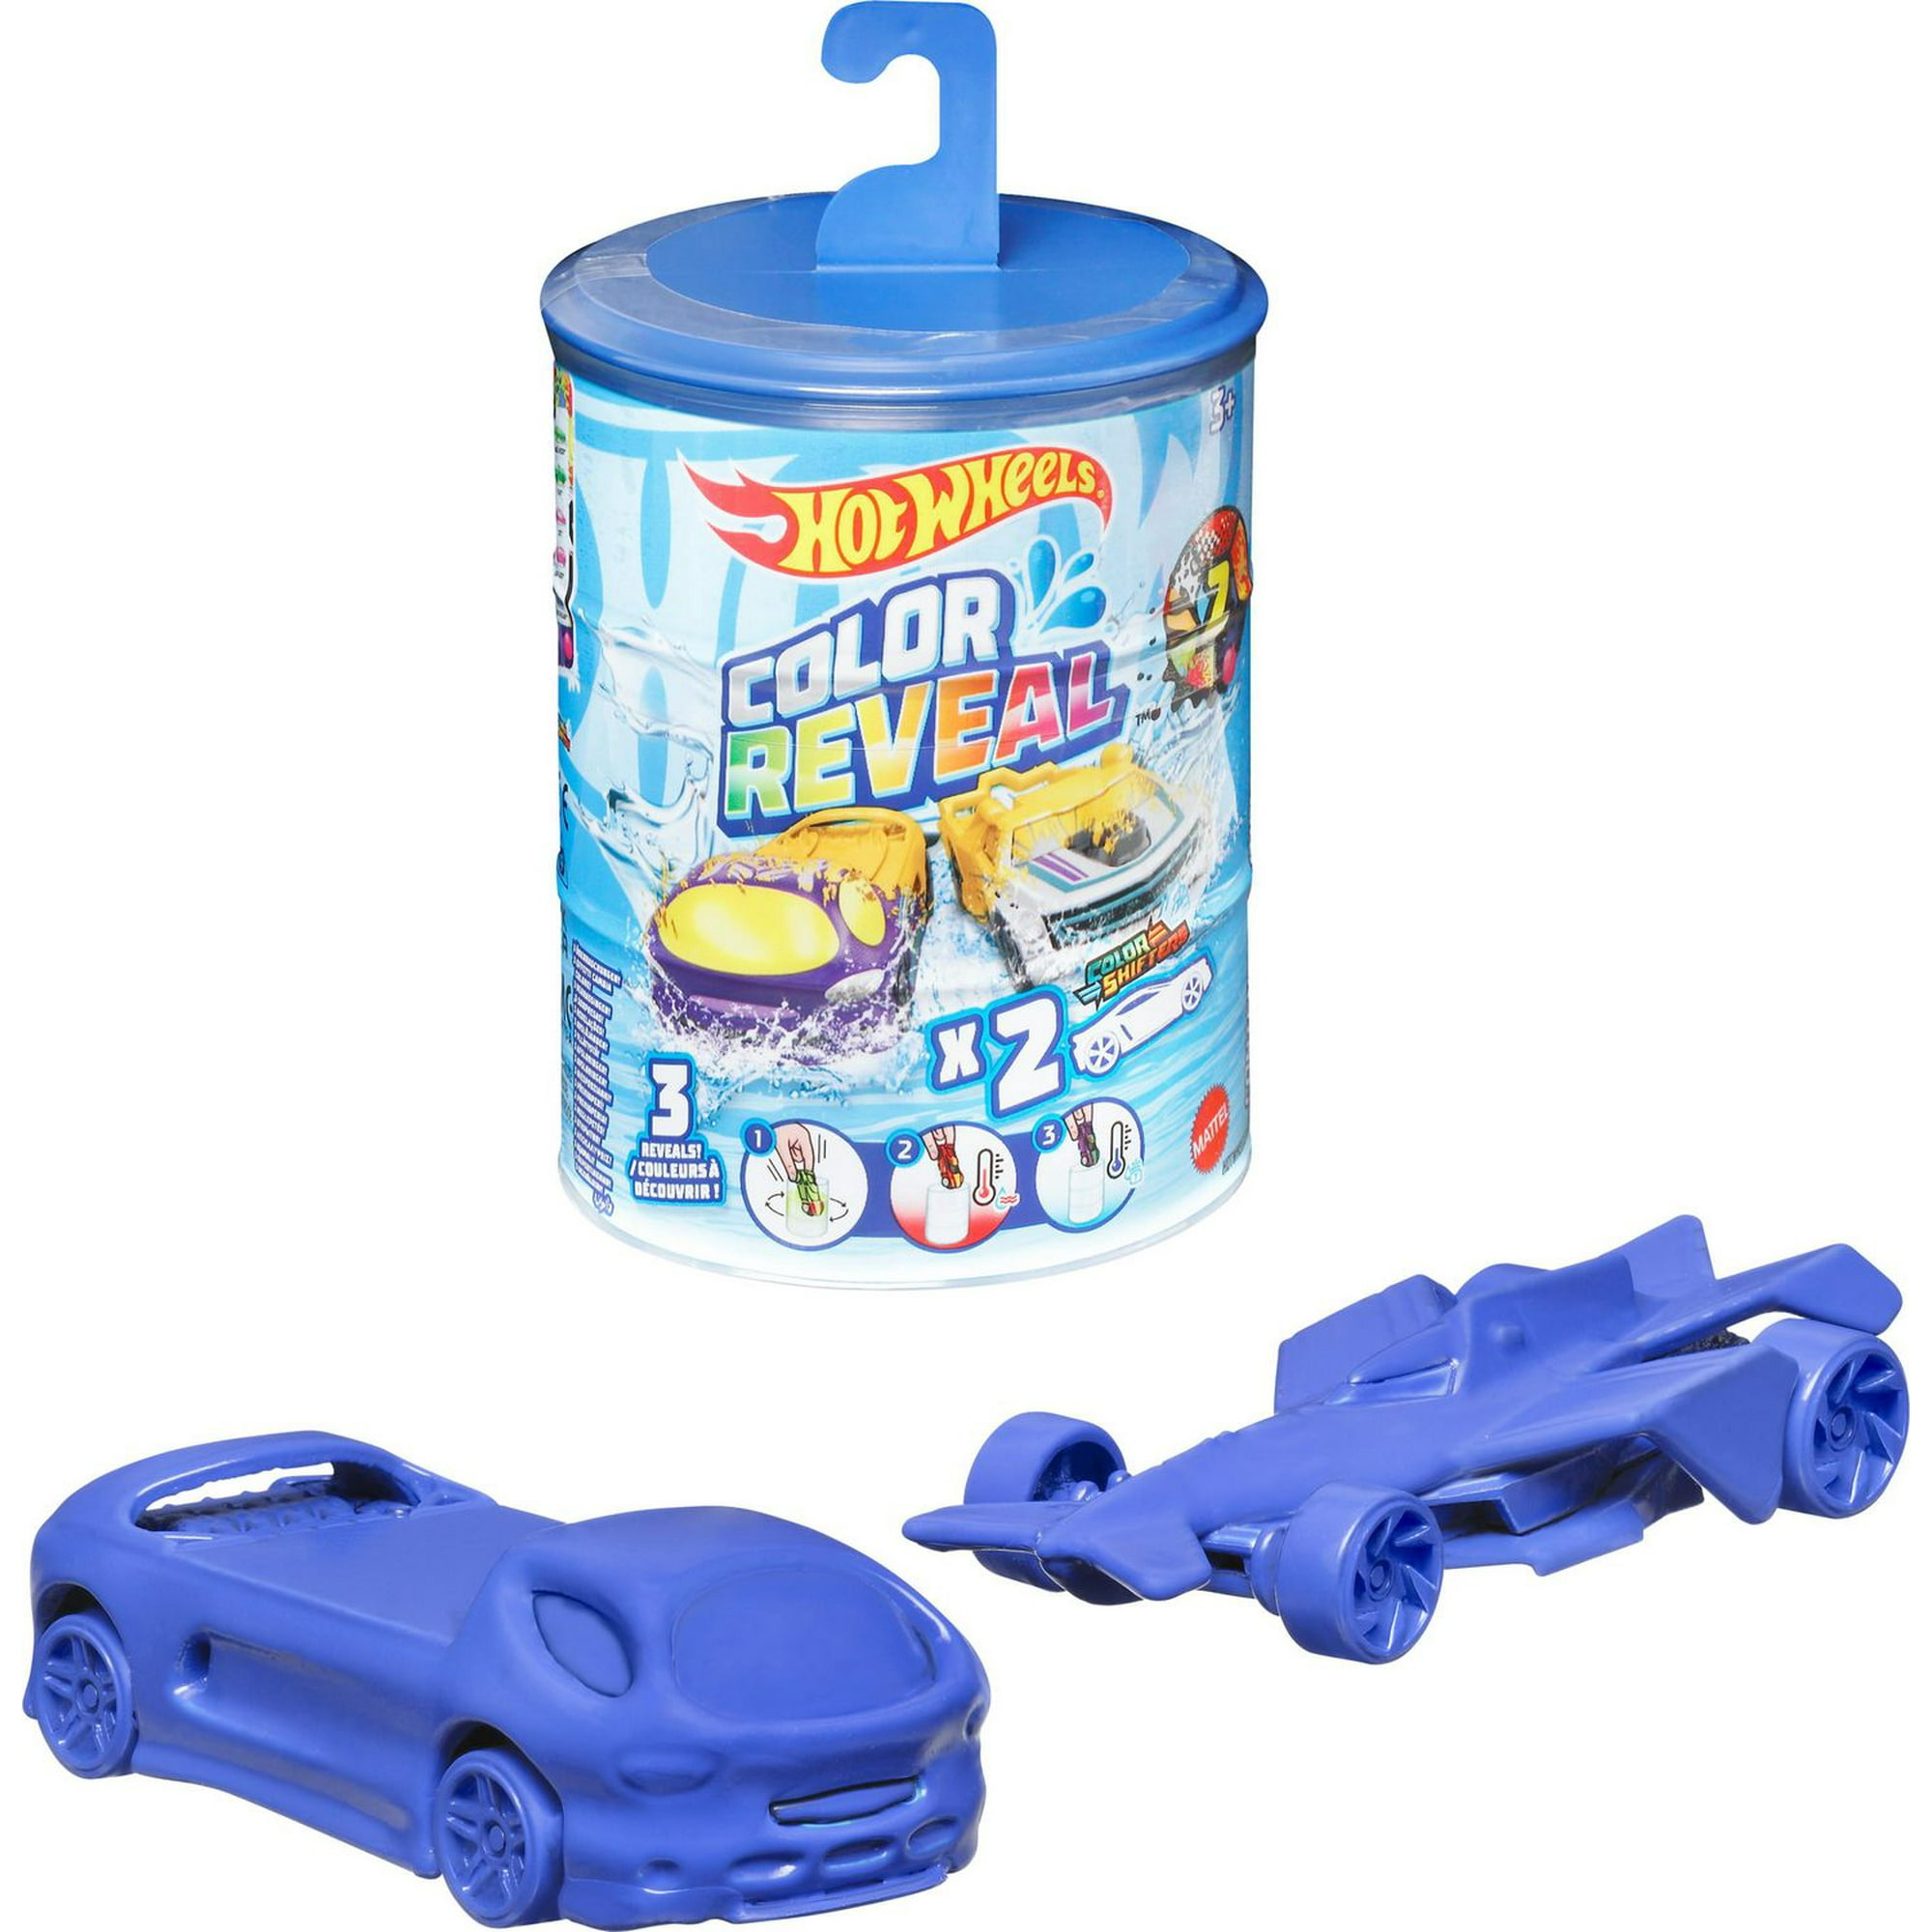 [LAST STOCK] Mattel Hot Wheels Original Tool Box Storage box Collection for  Cars with hot wheels logo (BLUE only)